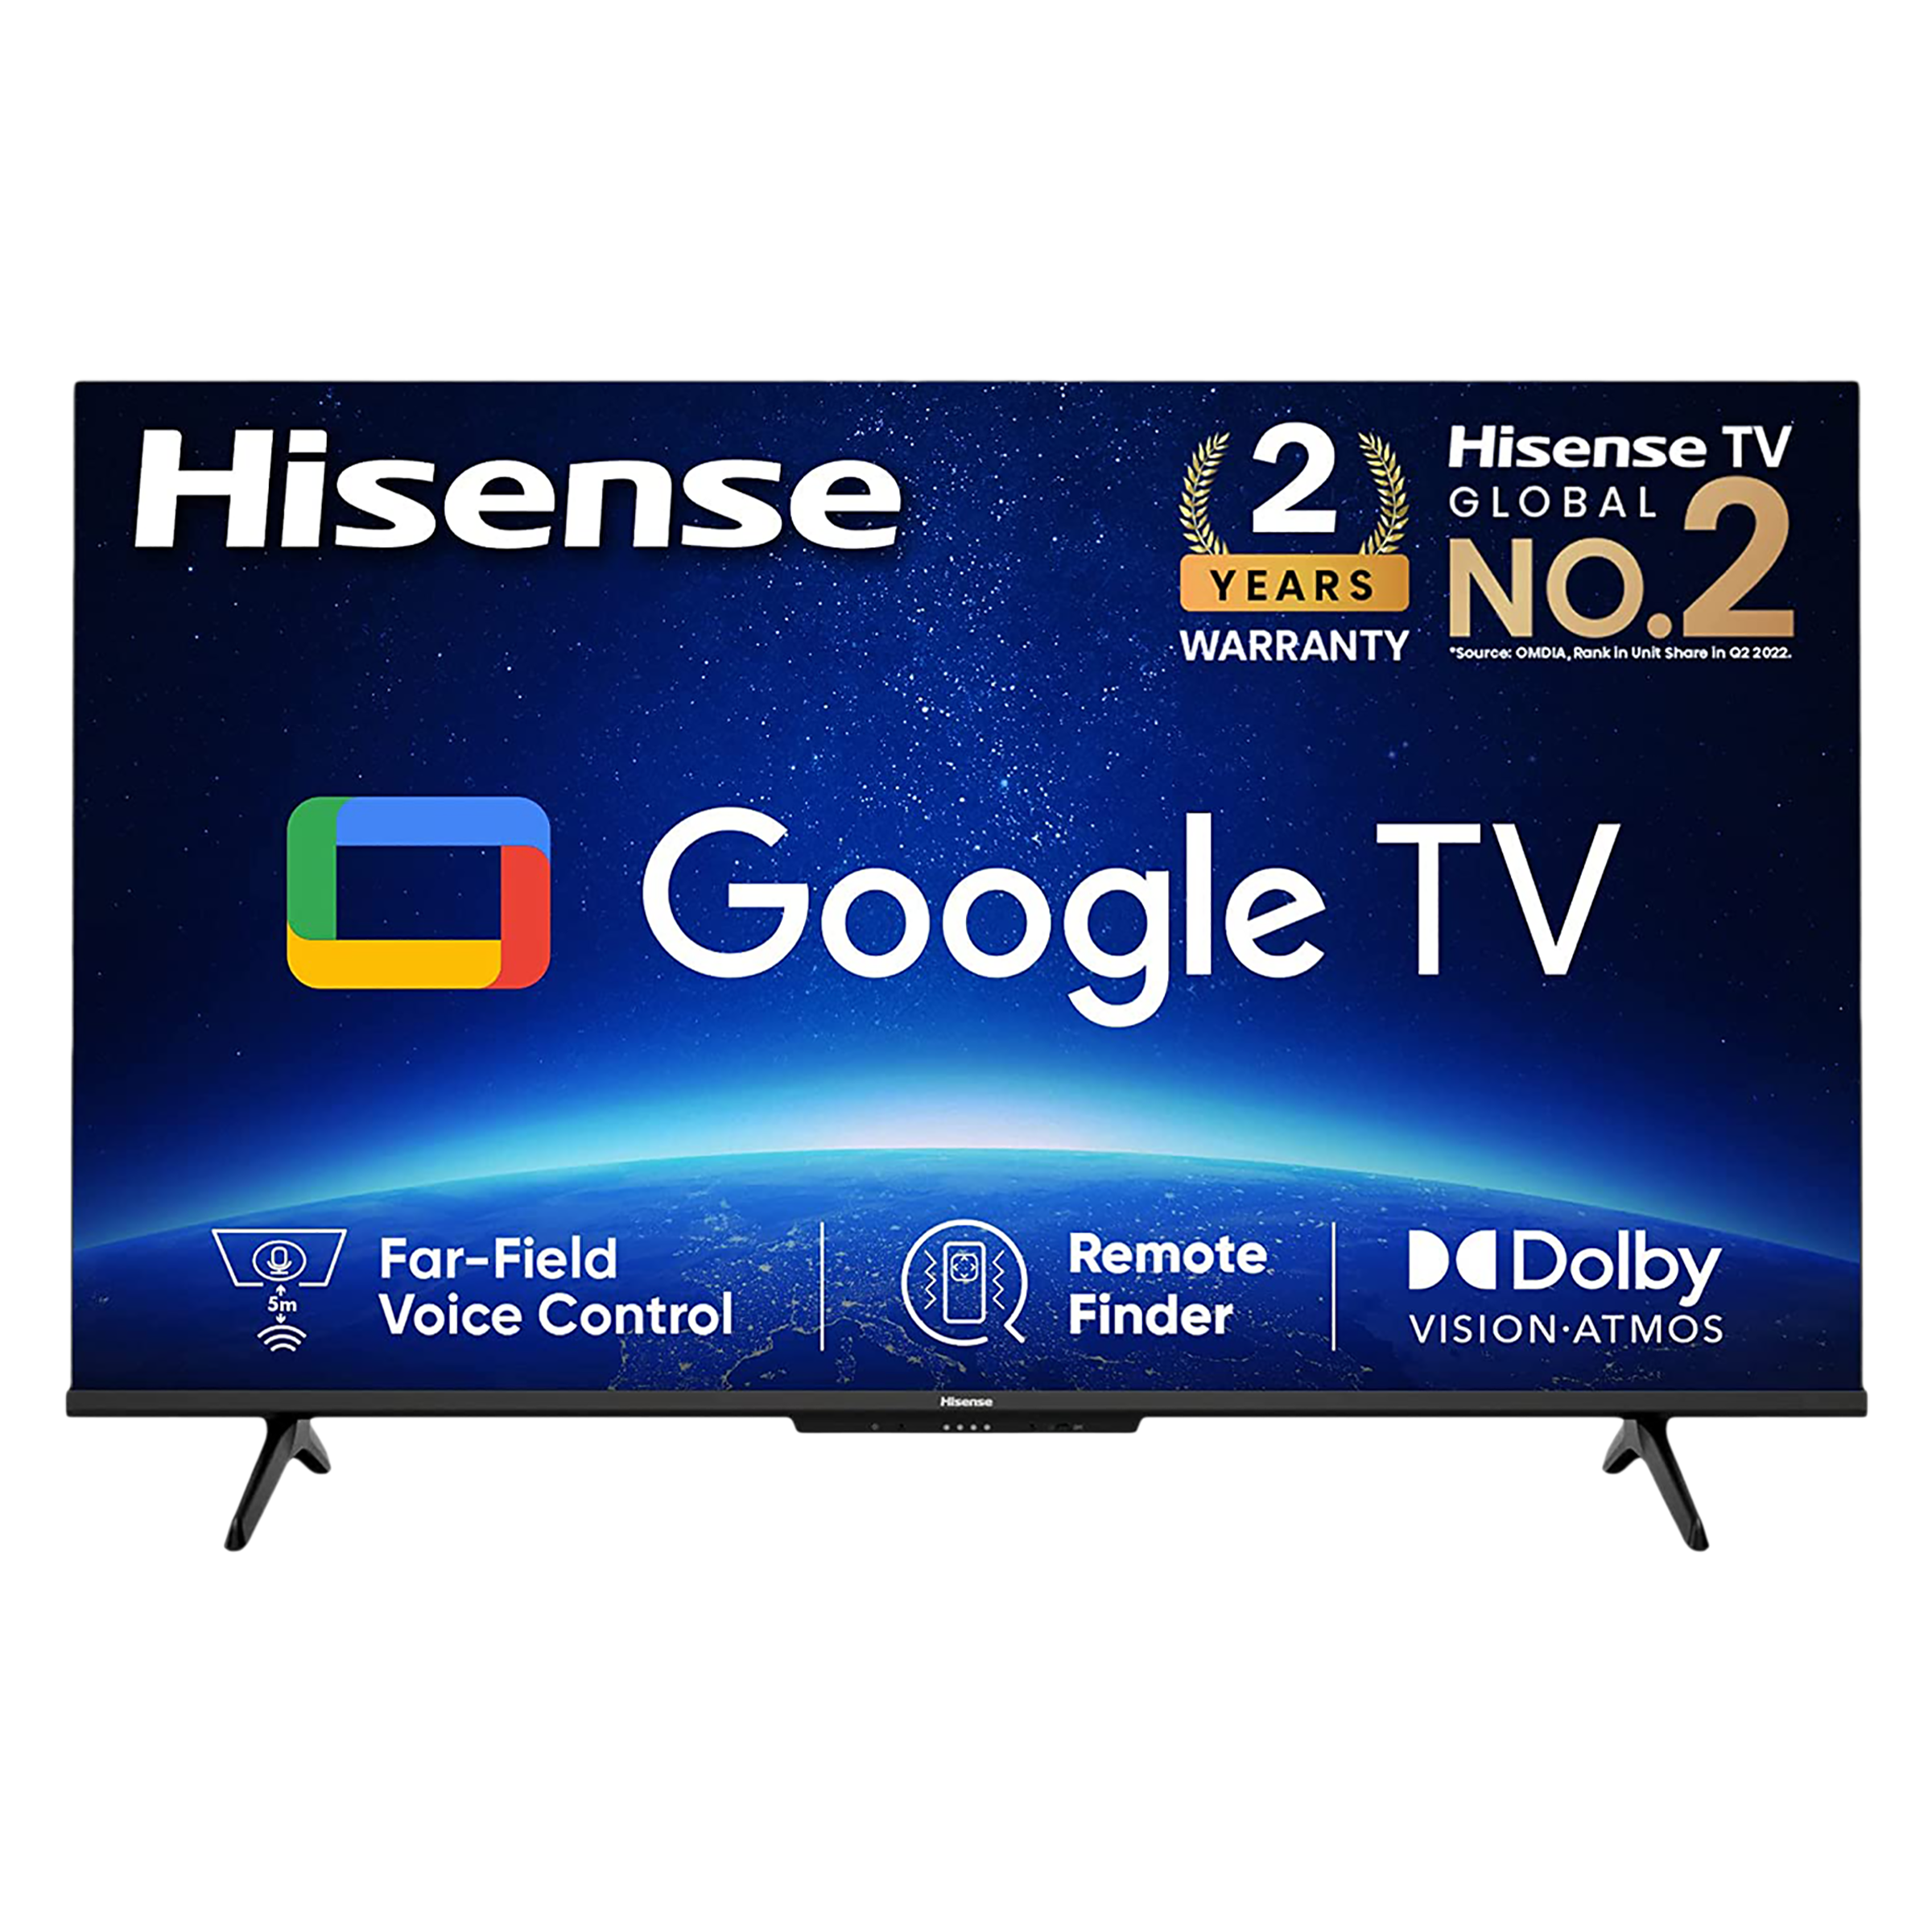 Hisense A6H 108 cm (43 inch) 4K Ultra HD LED Google TV with Dolby Vision (2022 model)_1